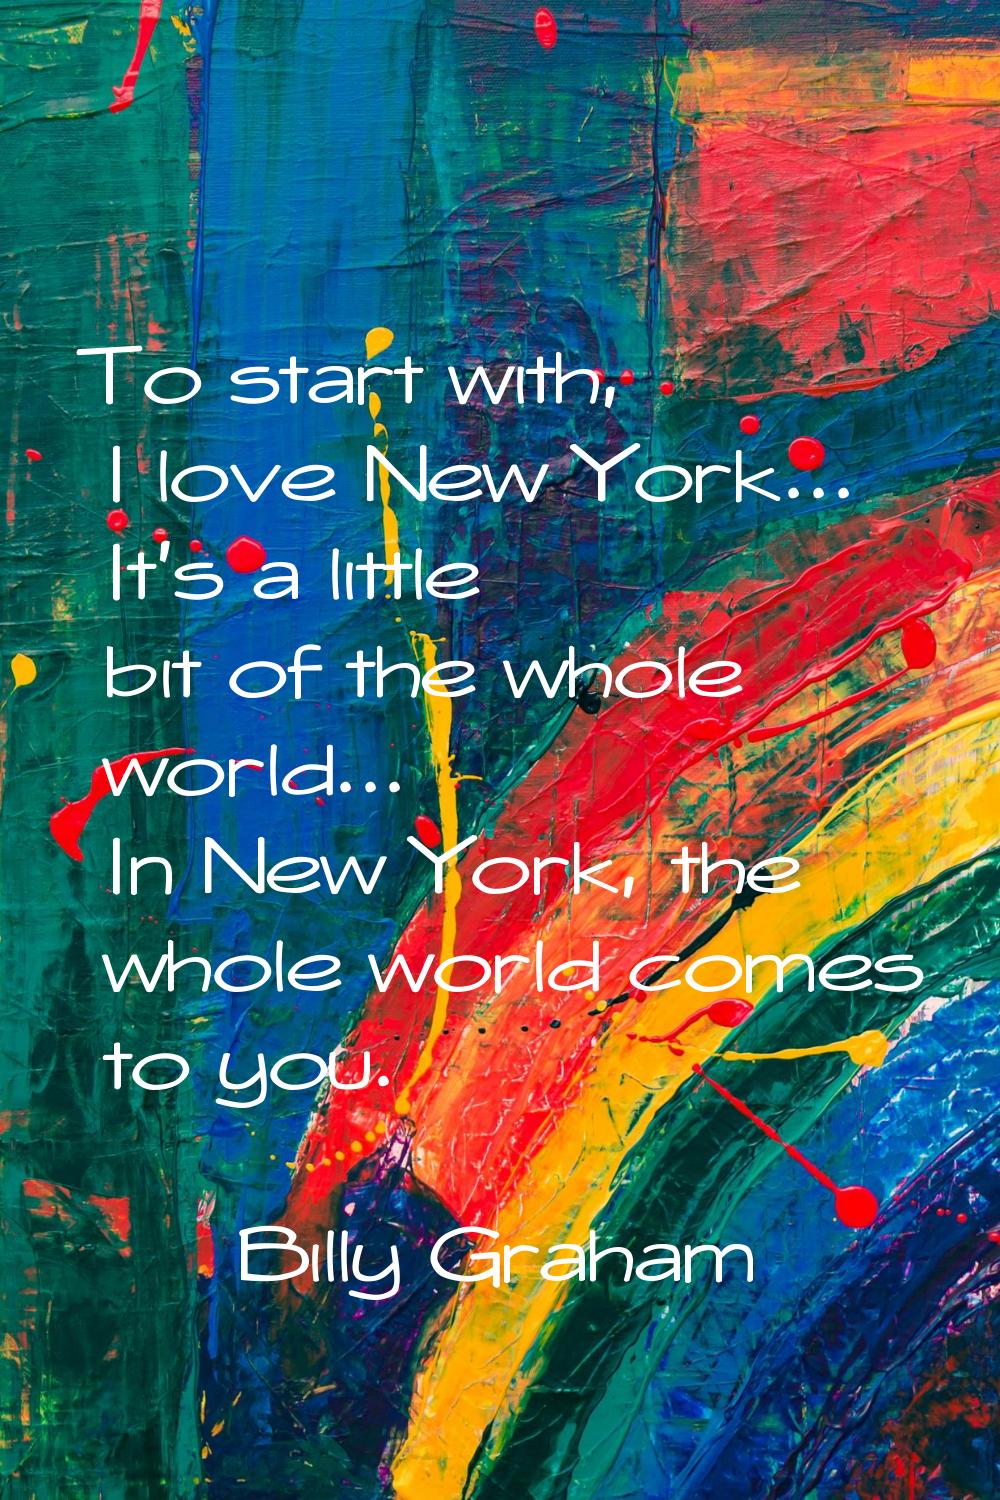 To start with, I love New York... It's a little bit of the whole world... In New York, the whole wo